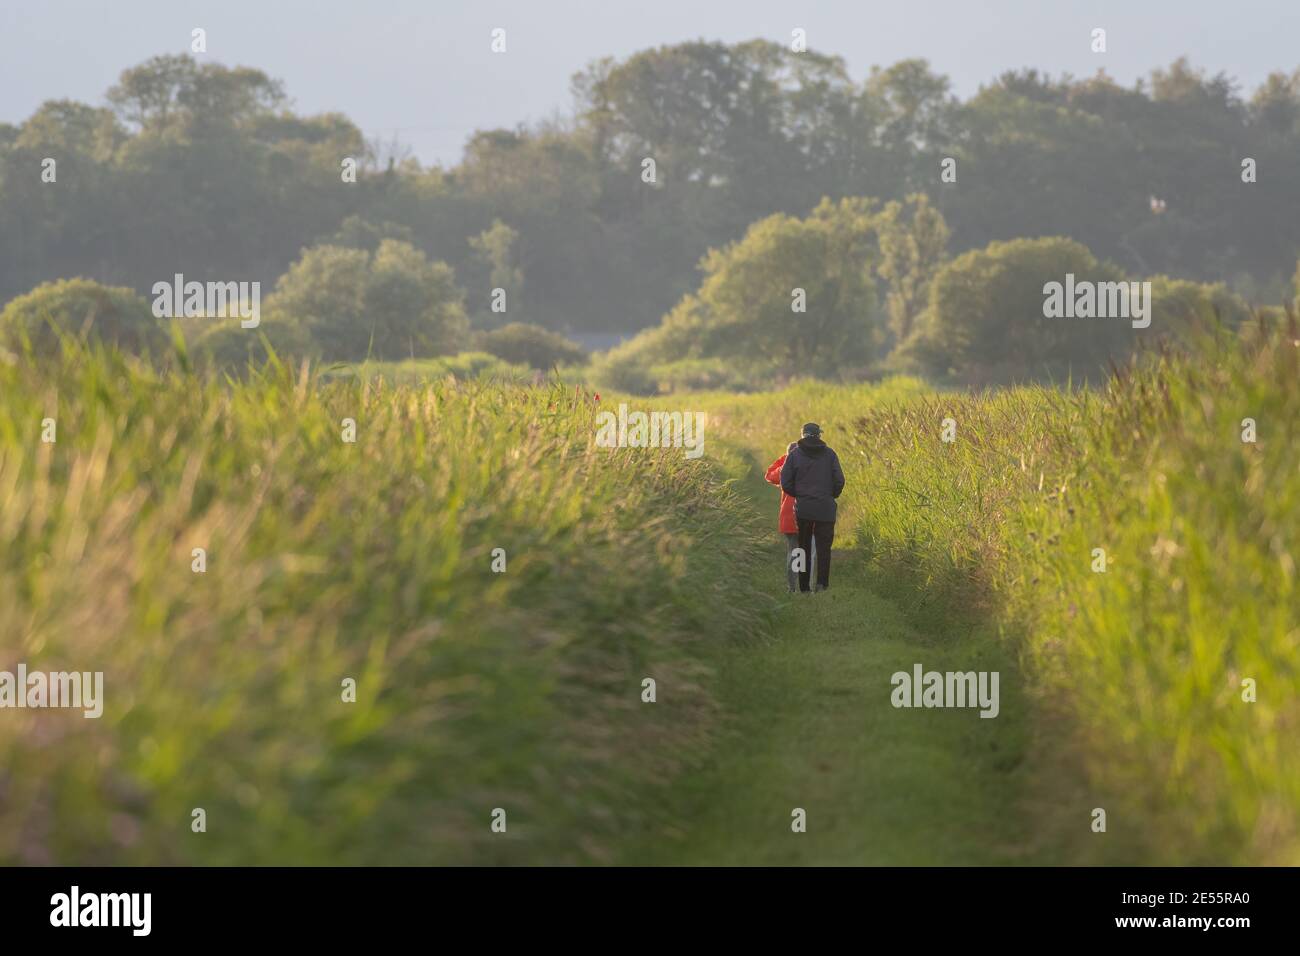 Man and woman walk away from the camera along grass path surrounded on both sides by tall grass, with trees on the horizon Stock Photo